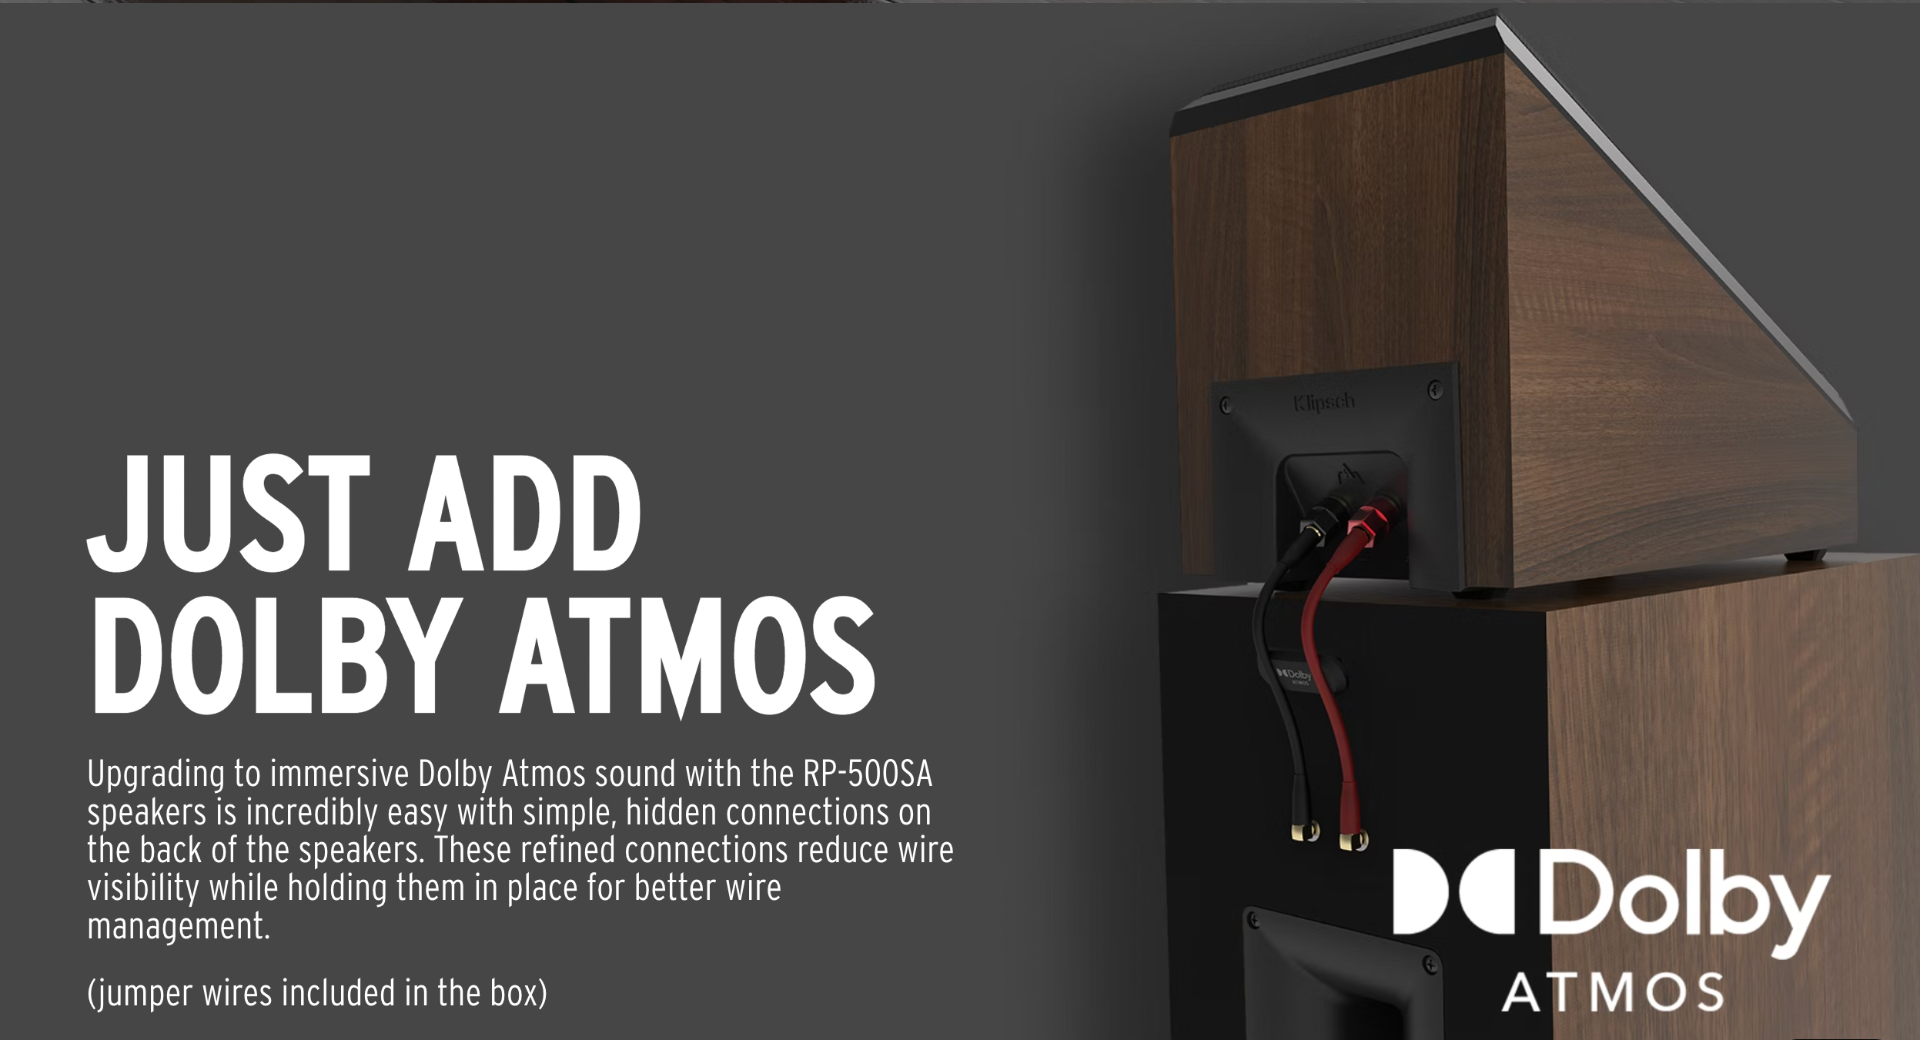 Upgrading to immersive Dolby Atmos sound with the RP-500SA speakers is incredibly easy with simple, hidden connections on the back of the speakers. These refined connections reduce wire visibility while holding them in place for better wire management.